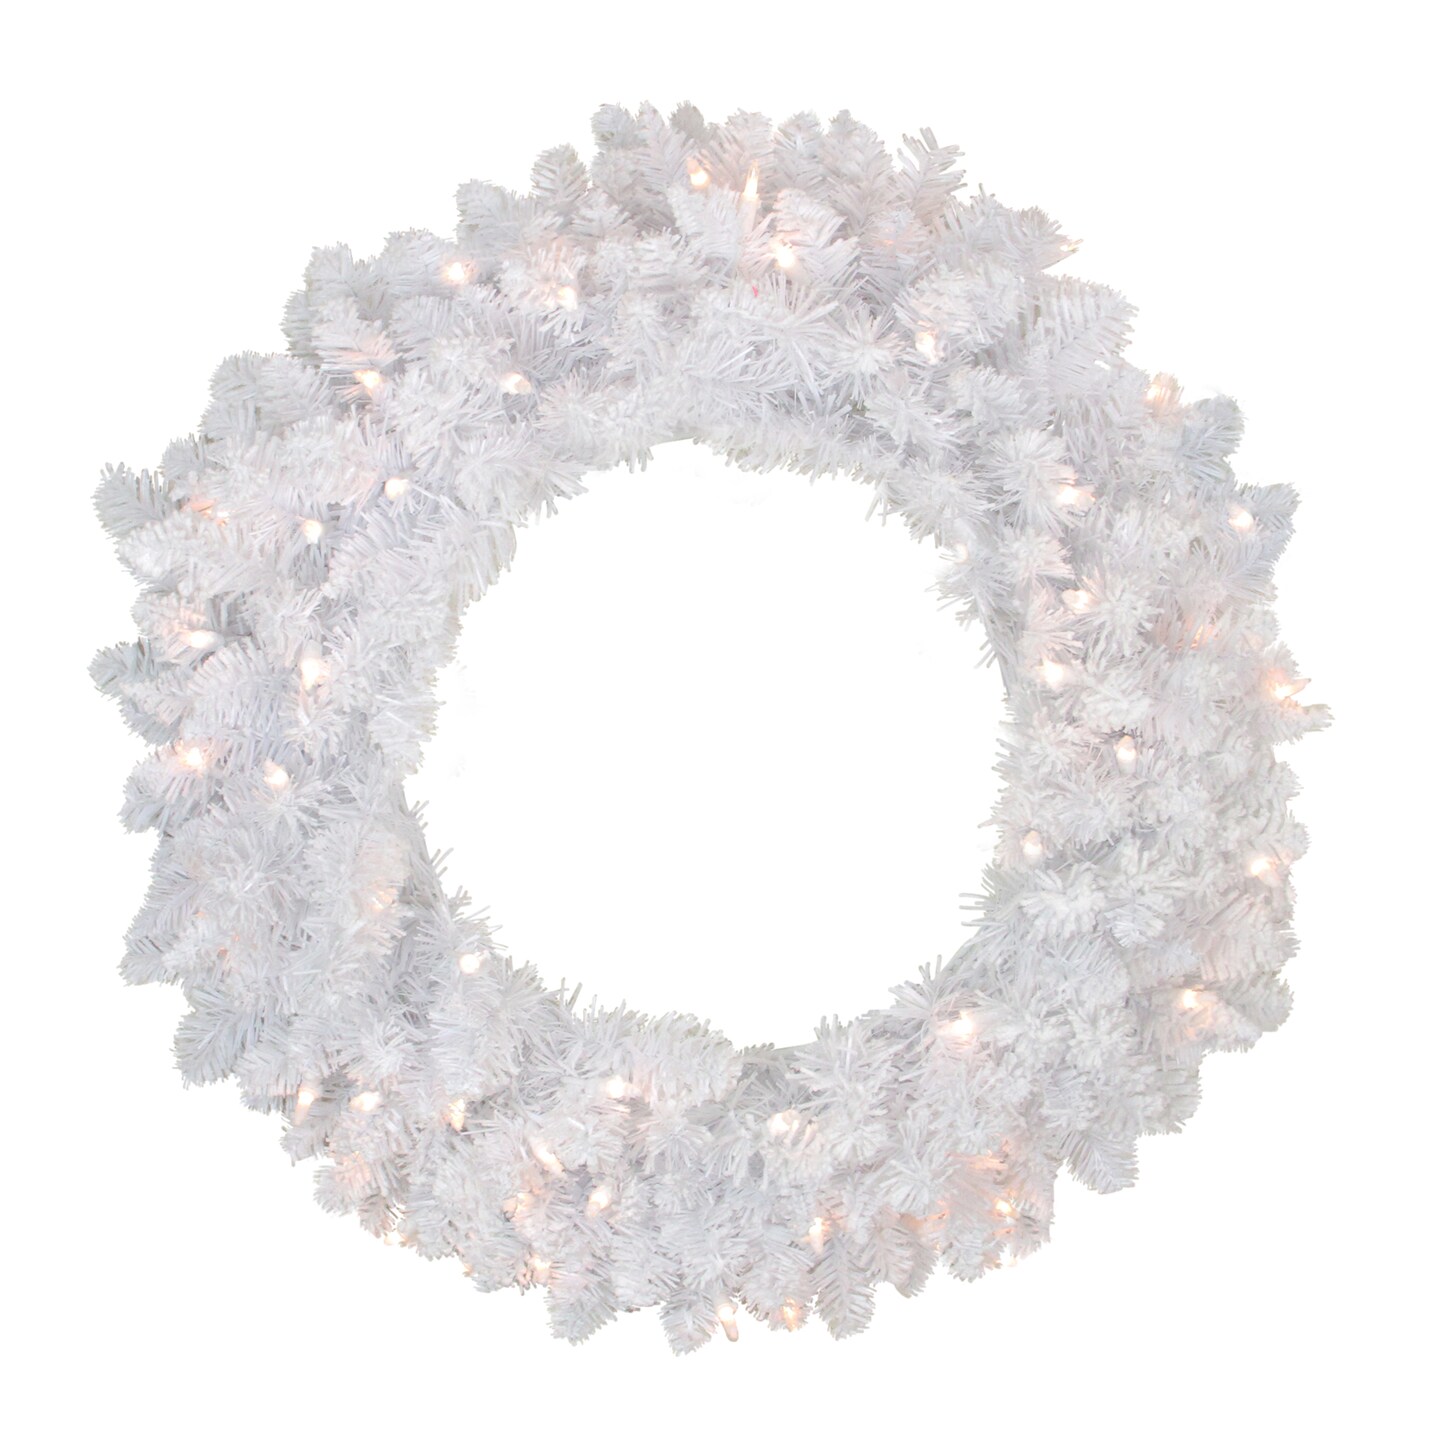 Northlight Pre-Lit Flocked Snow White Artificial Christmas Wreath - 24-Inch, Clear Lights